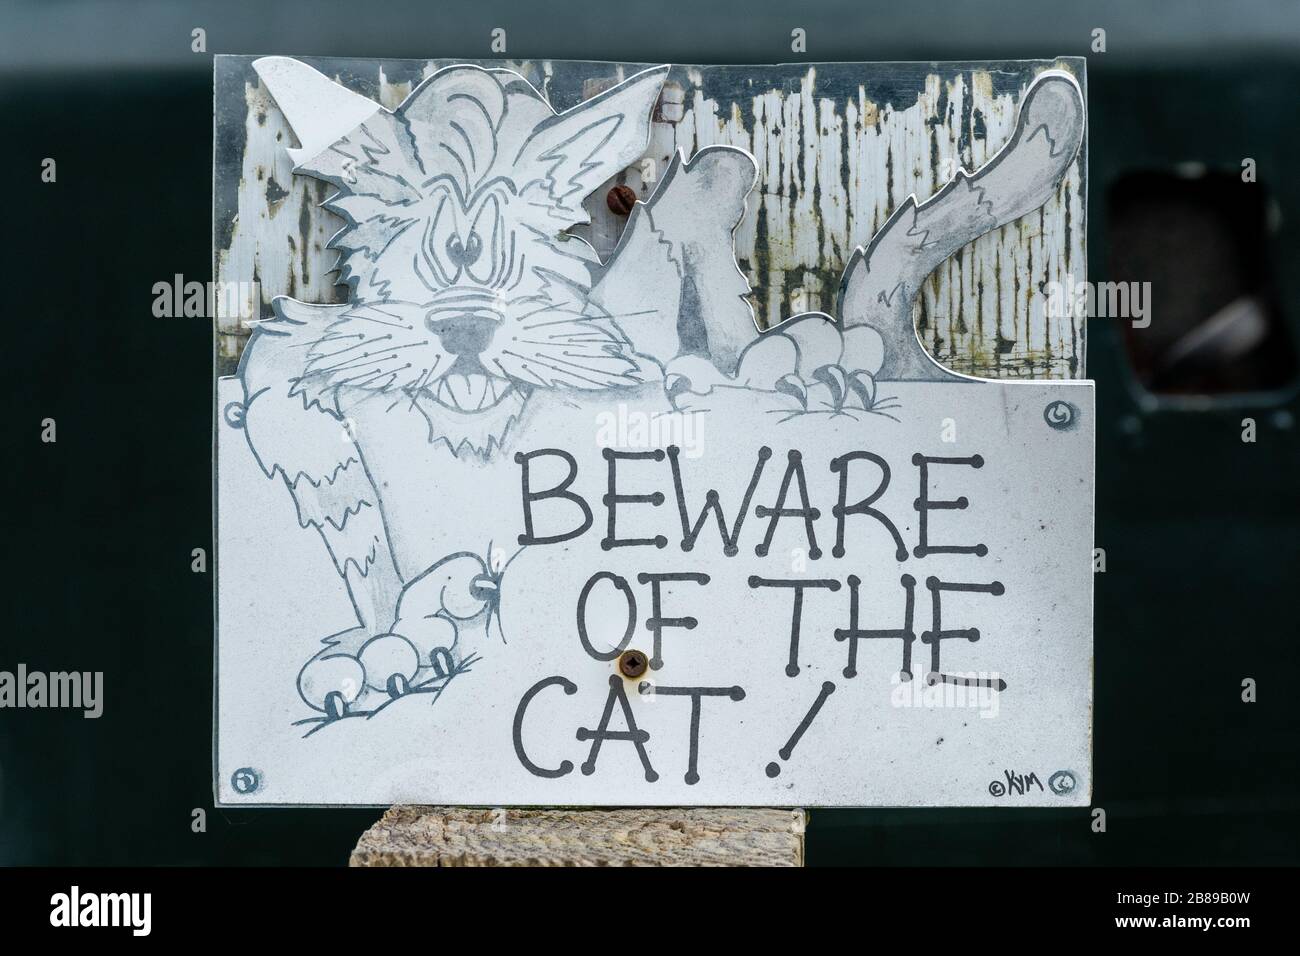 Amusing humorous sign Beware of the Cat with a scary cat cartoon picture Stock Photo